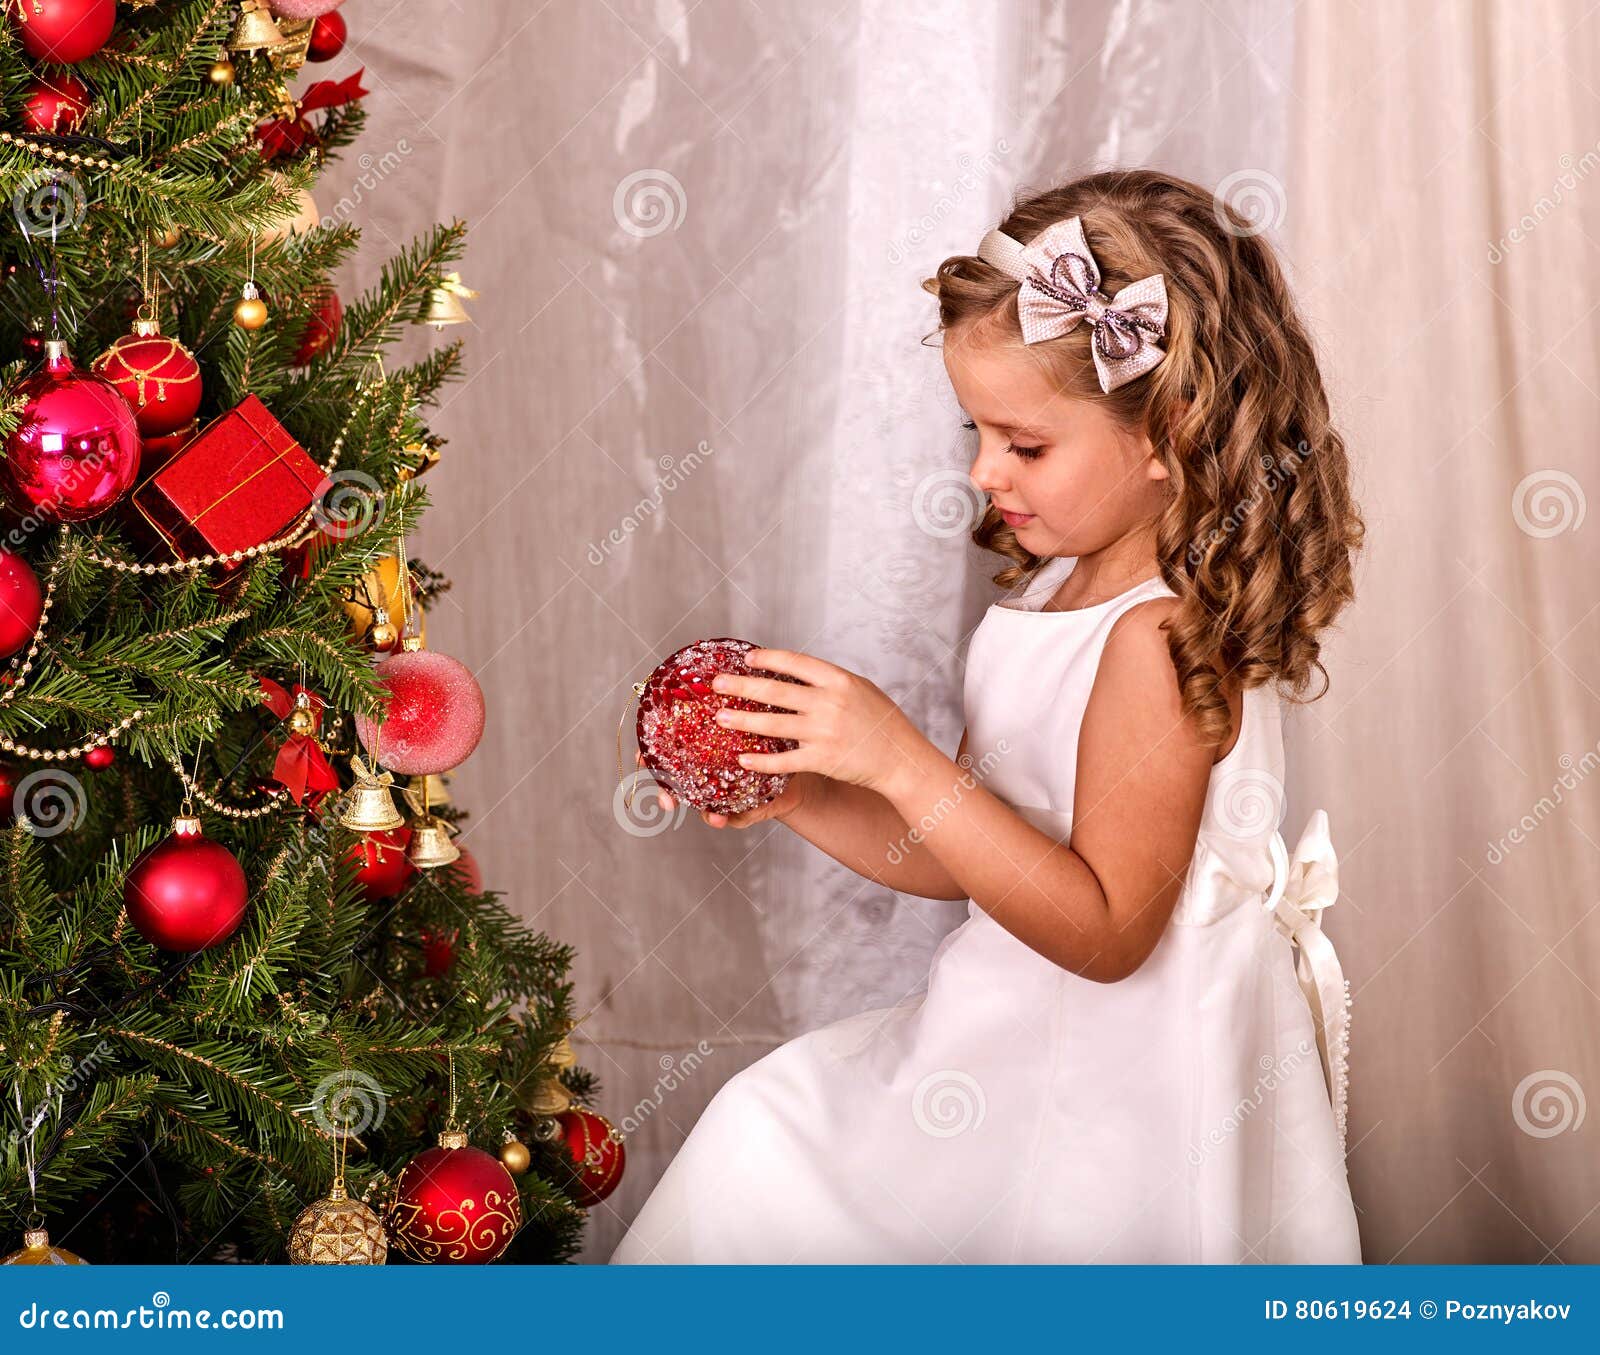 Child Decorate On Christmas Tree Home Alone. Stock Photo - Image of child, decorate: 80619624